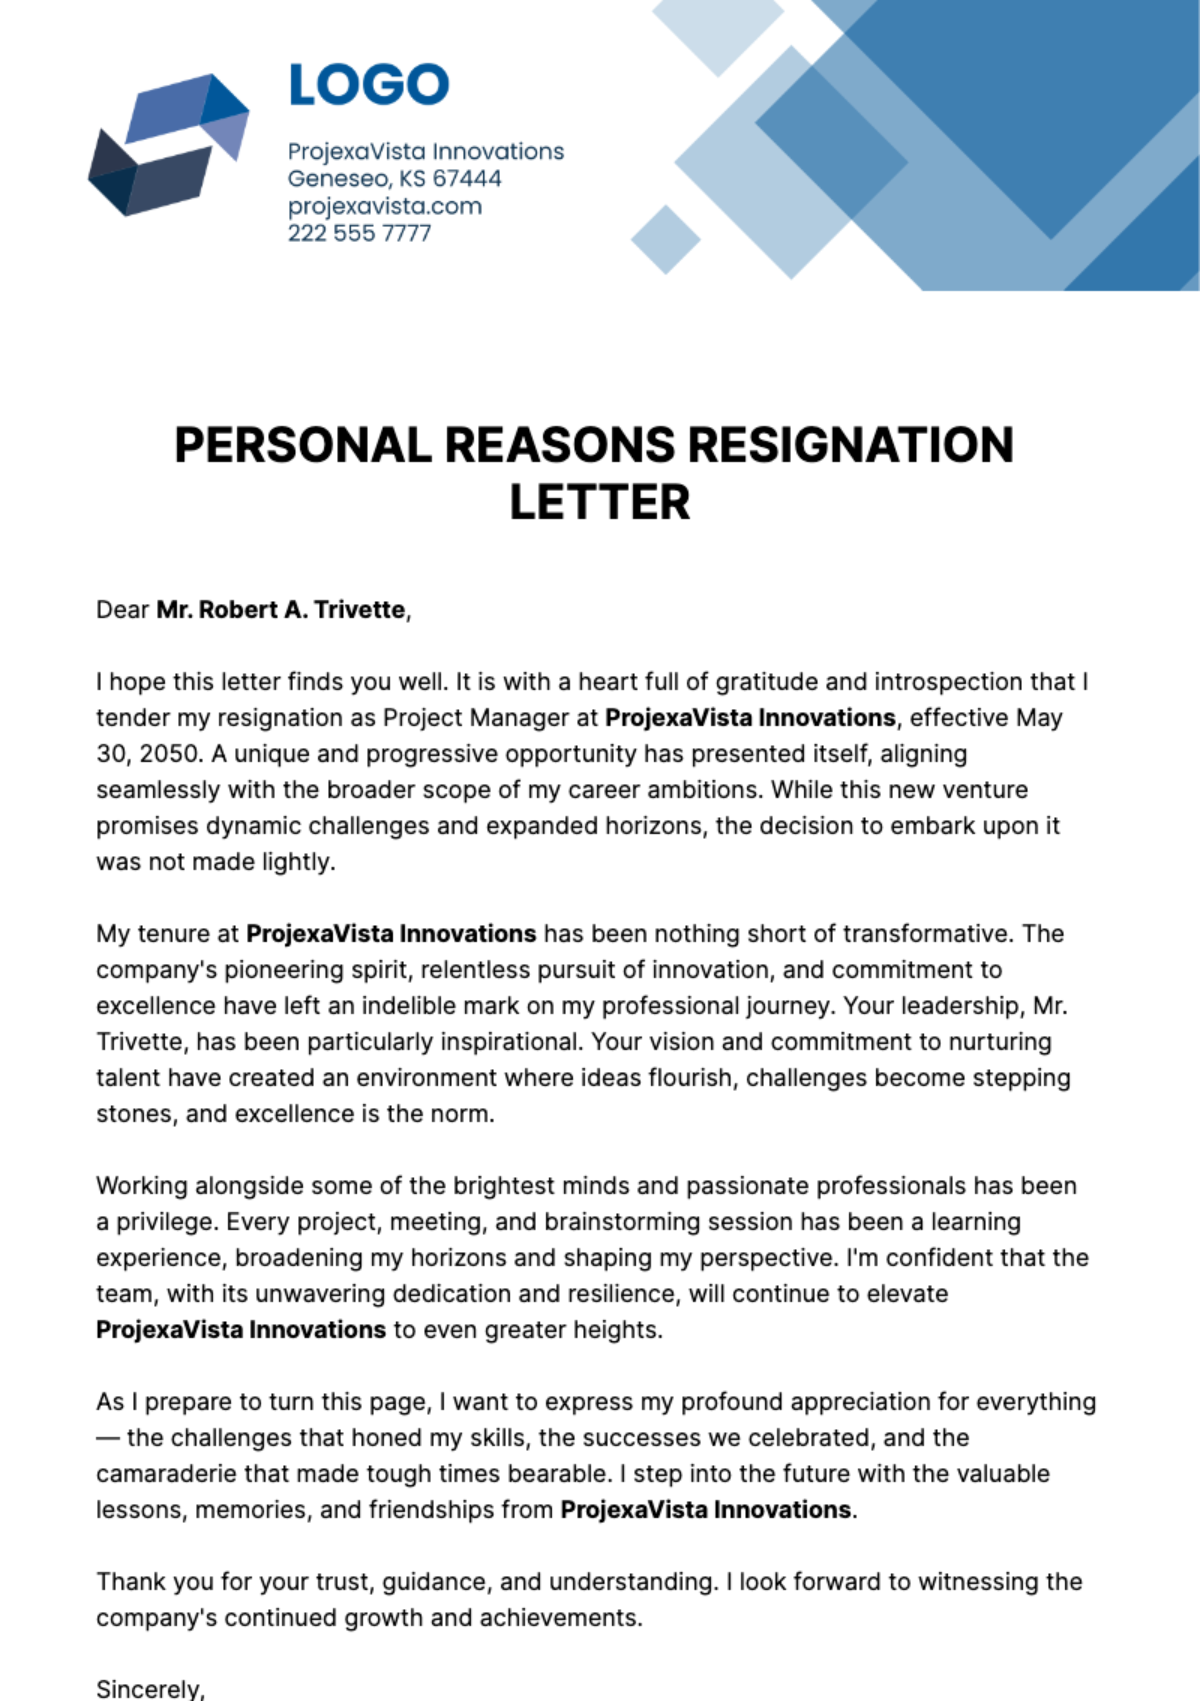 Personal Reasons Resignation Letter  Template